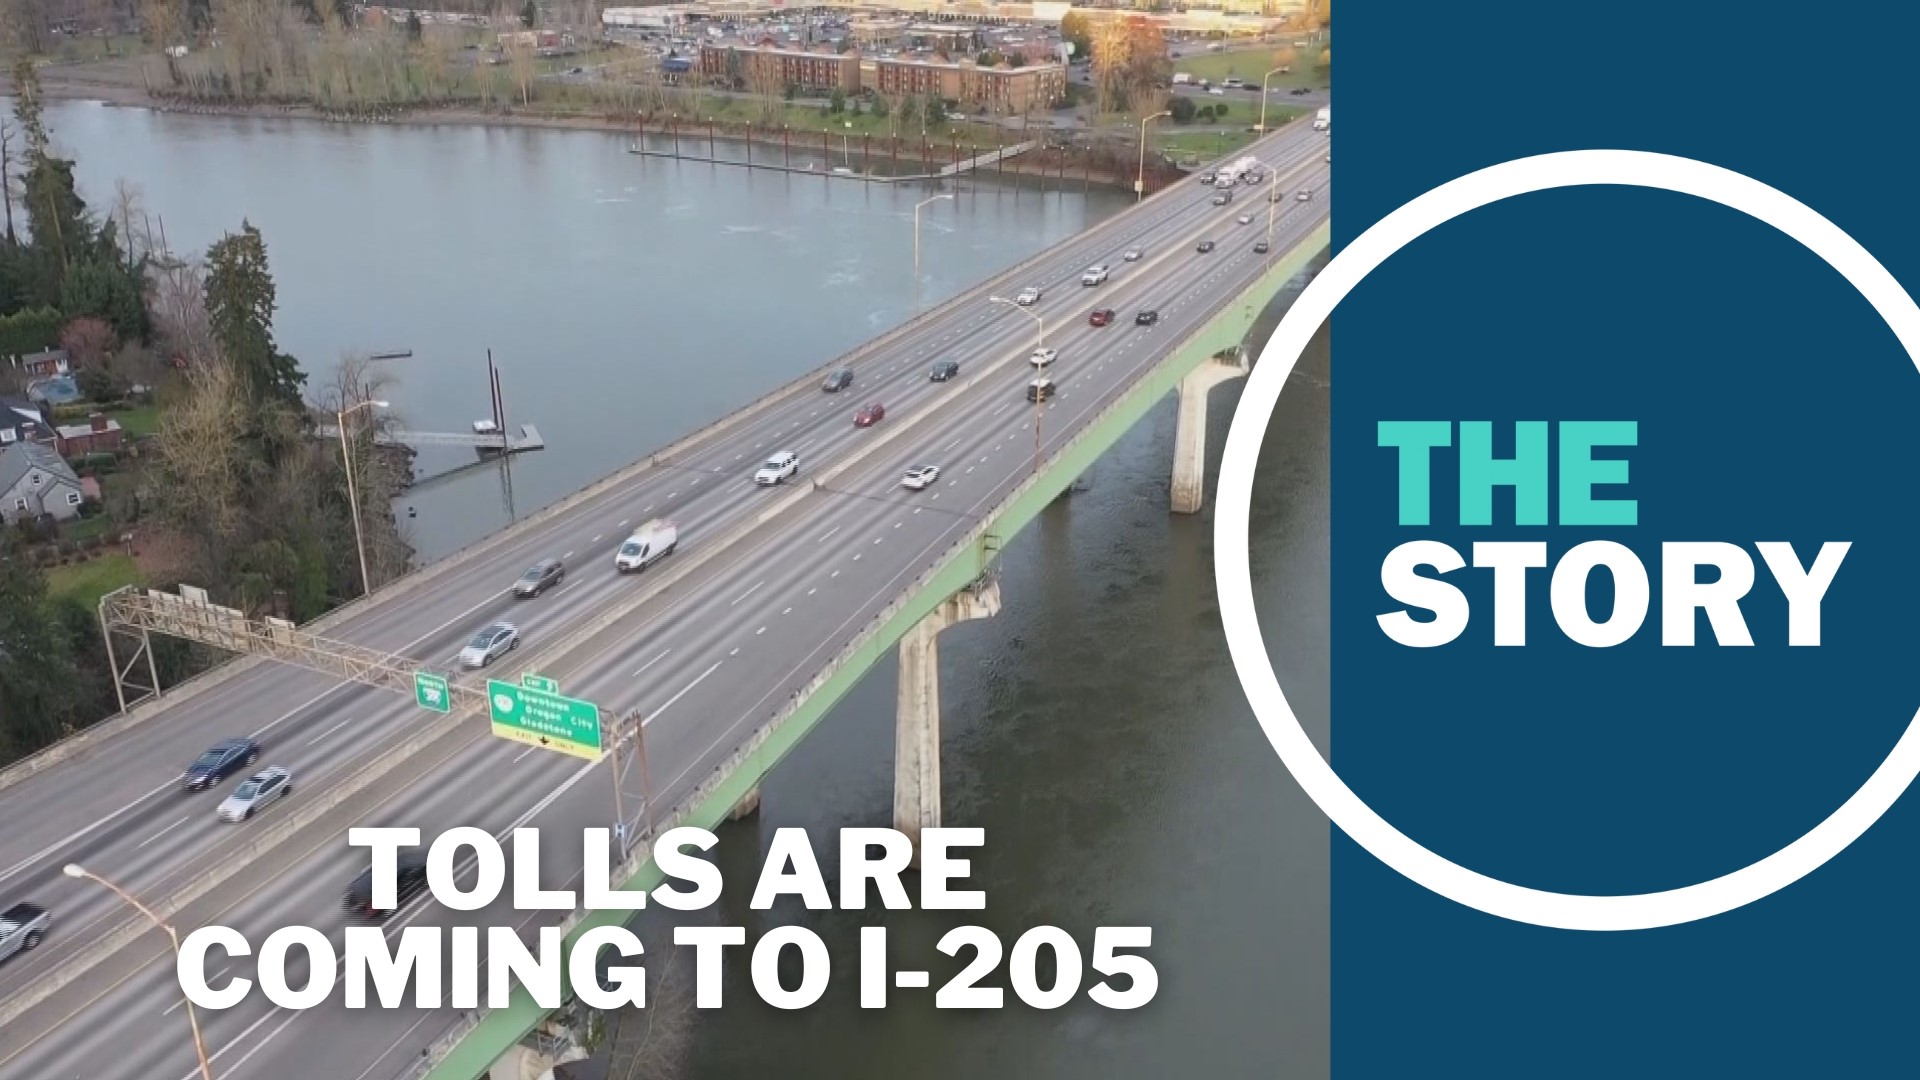 The program could cost commuters from $.50 to $2.20 per pass over a toll bridge, depending on the time of day and level of congestion.